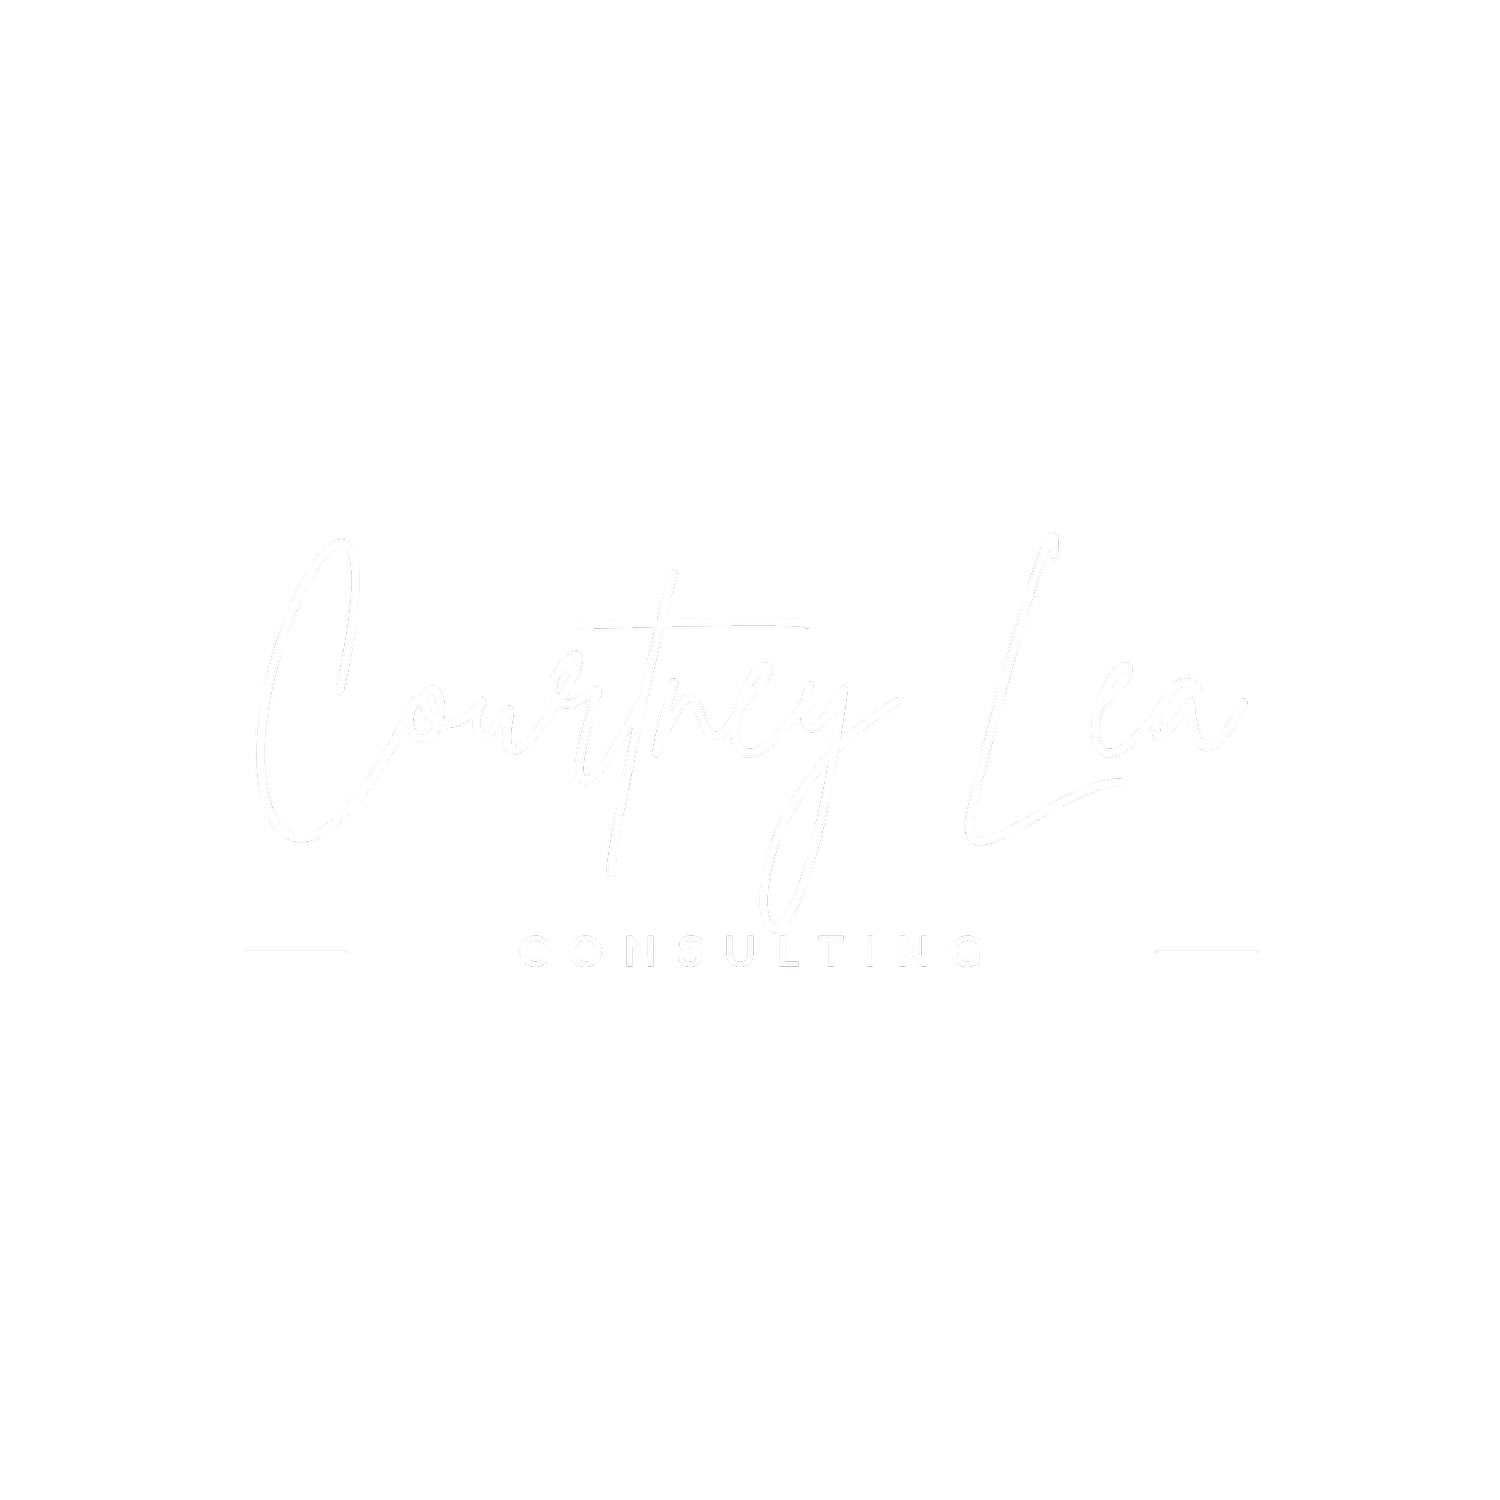 Courtney Lea Consulting